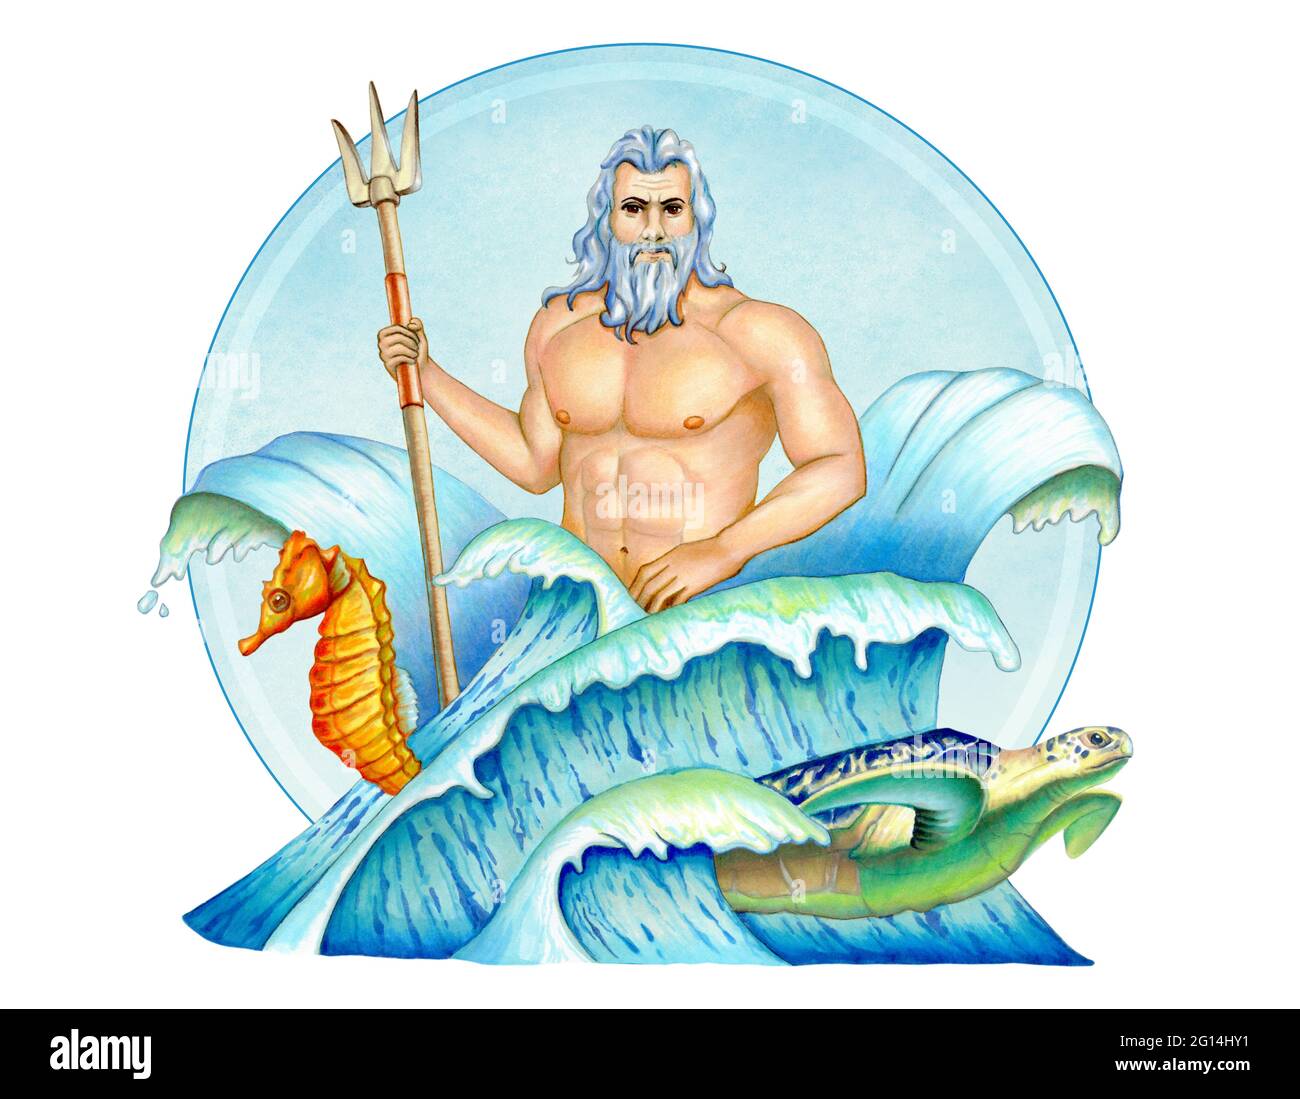 Poseidon, greek god of the sea, in a composition with waves, a seahorse and a sea turtle. Mixed media illustration. Stock Photo